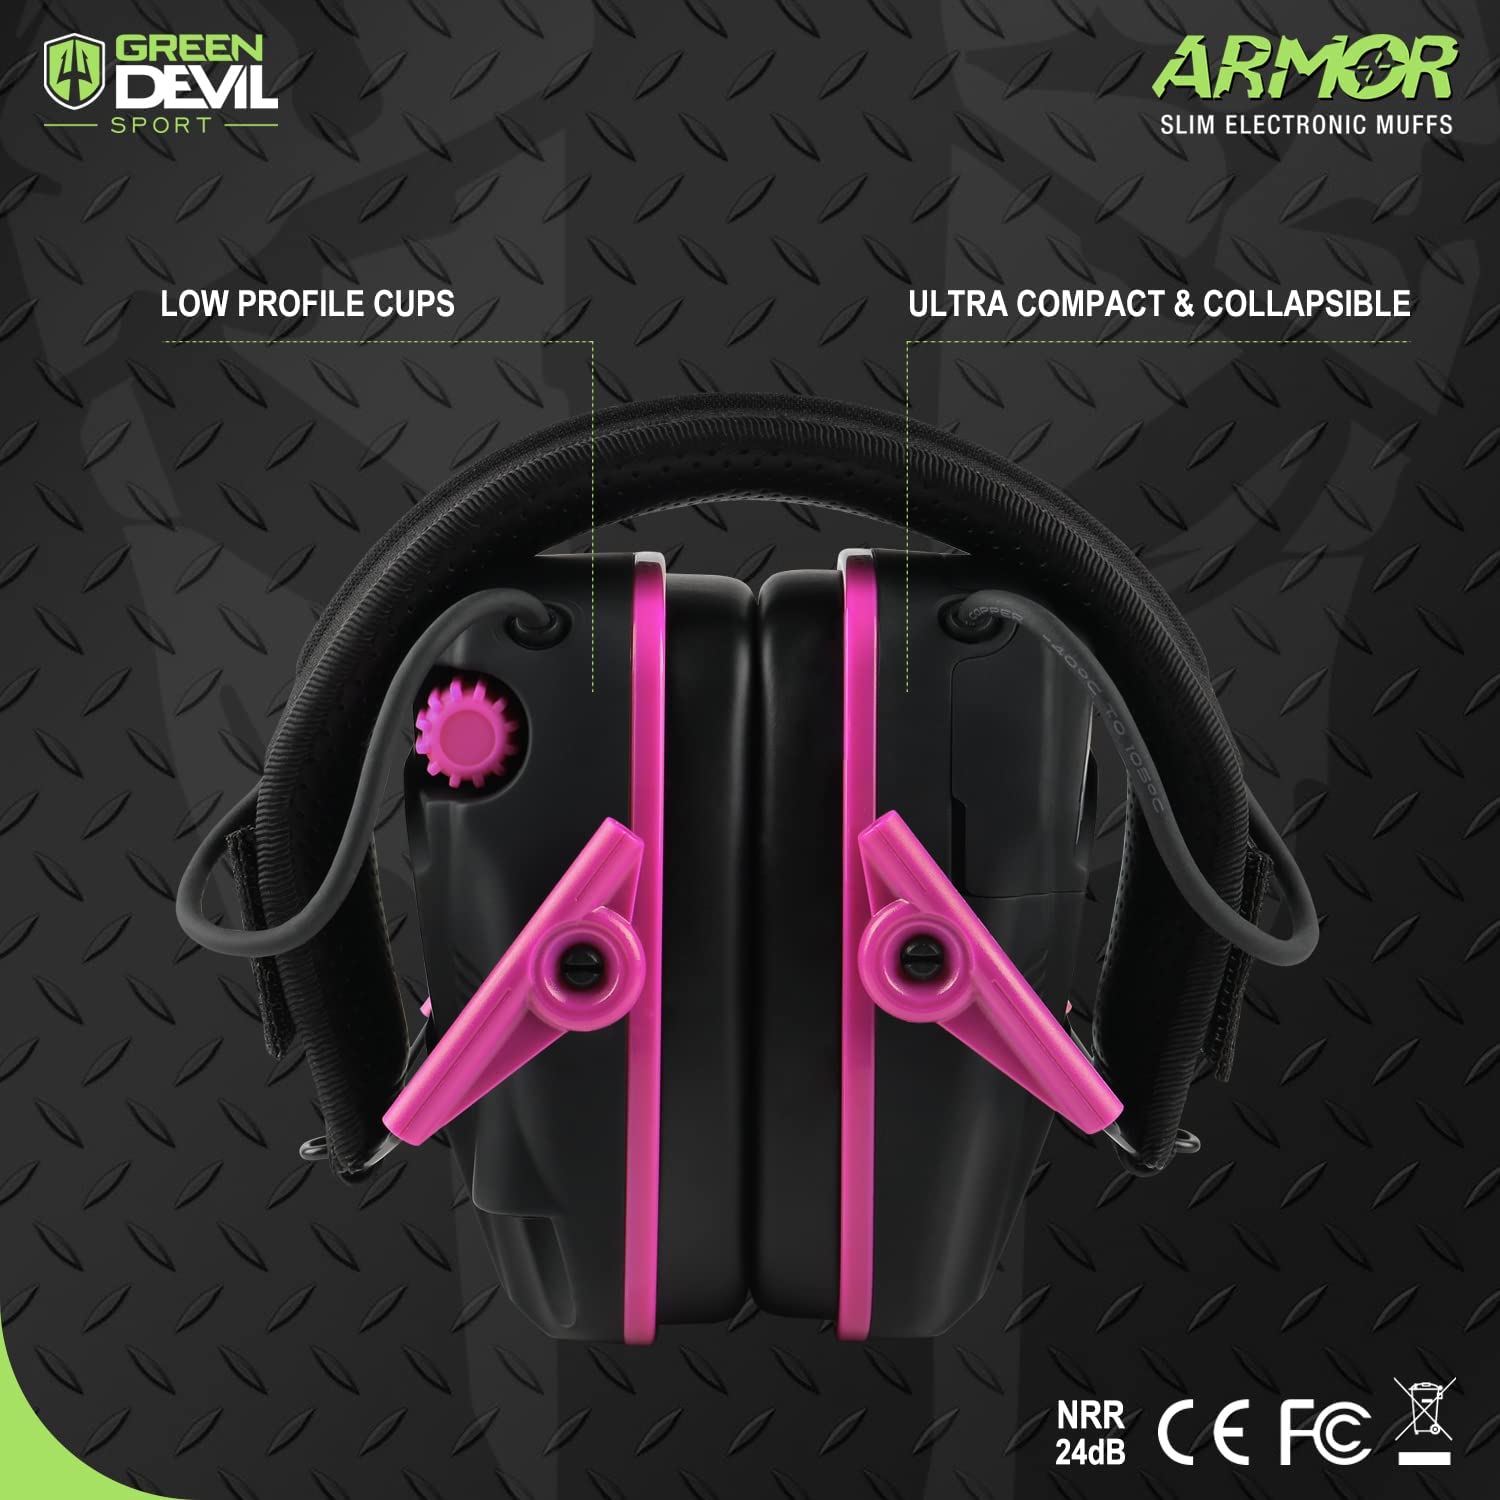 GREEN DEVIL Shooting Ear Protection Electronic Noise Reduction Hearing Protection Earmuffs Headphones For Gun Range Hunting Pink and Black